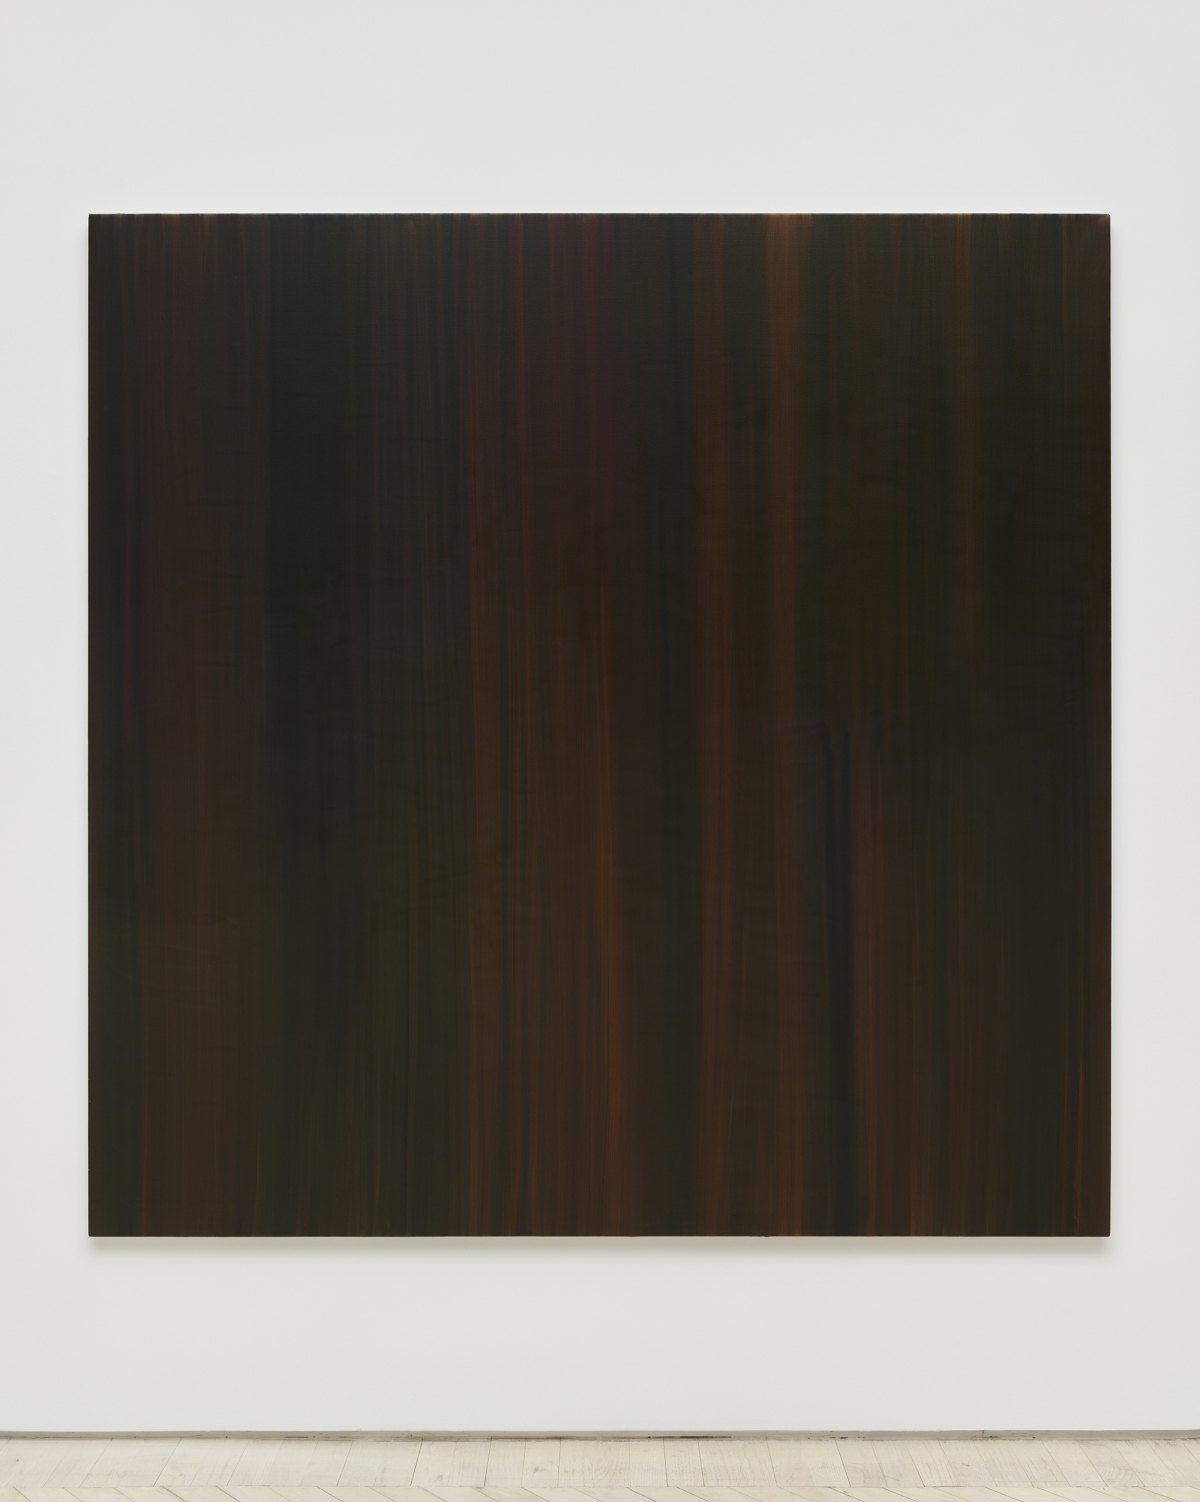 A large square, abstract painting rendered in a range of dark browns. 